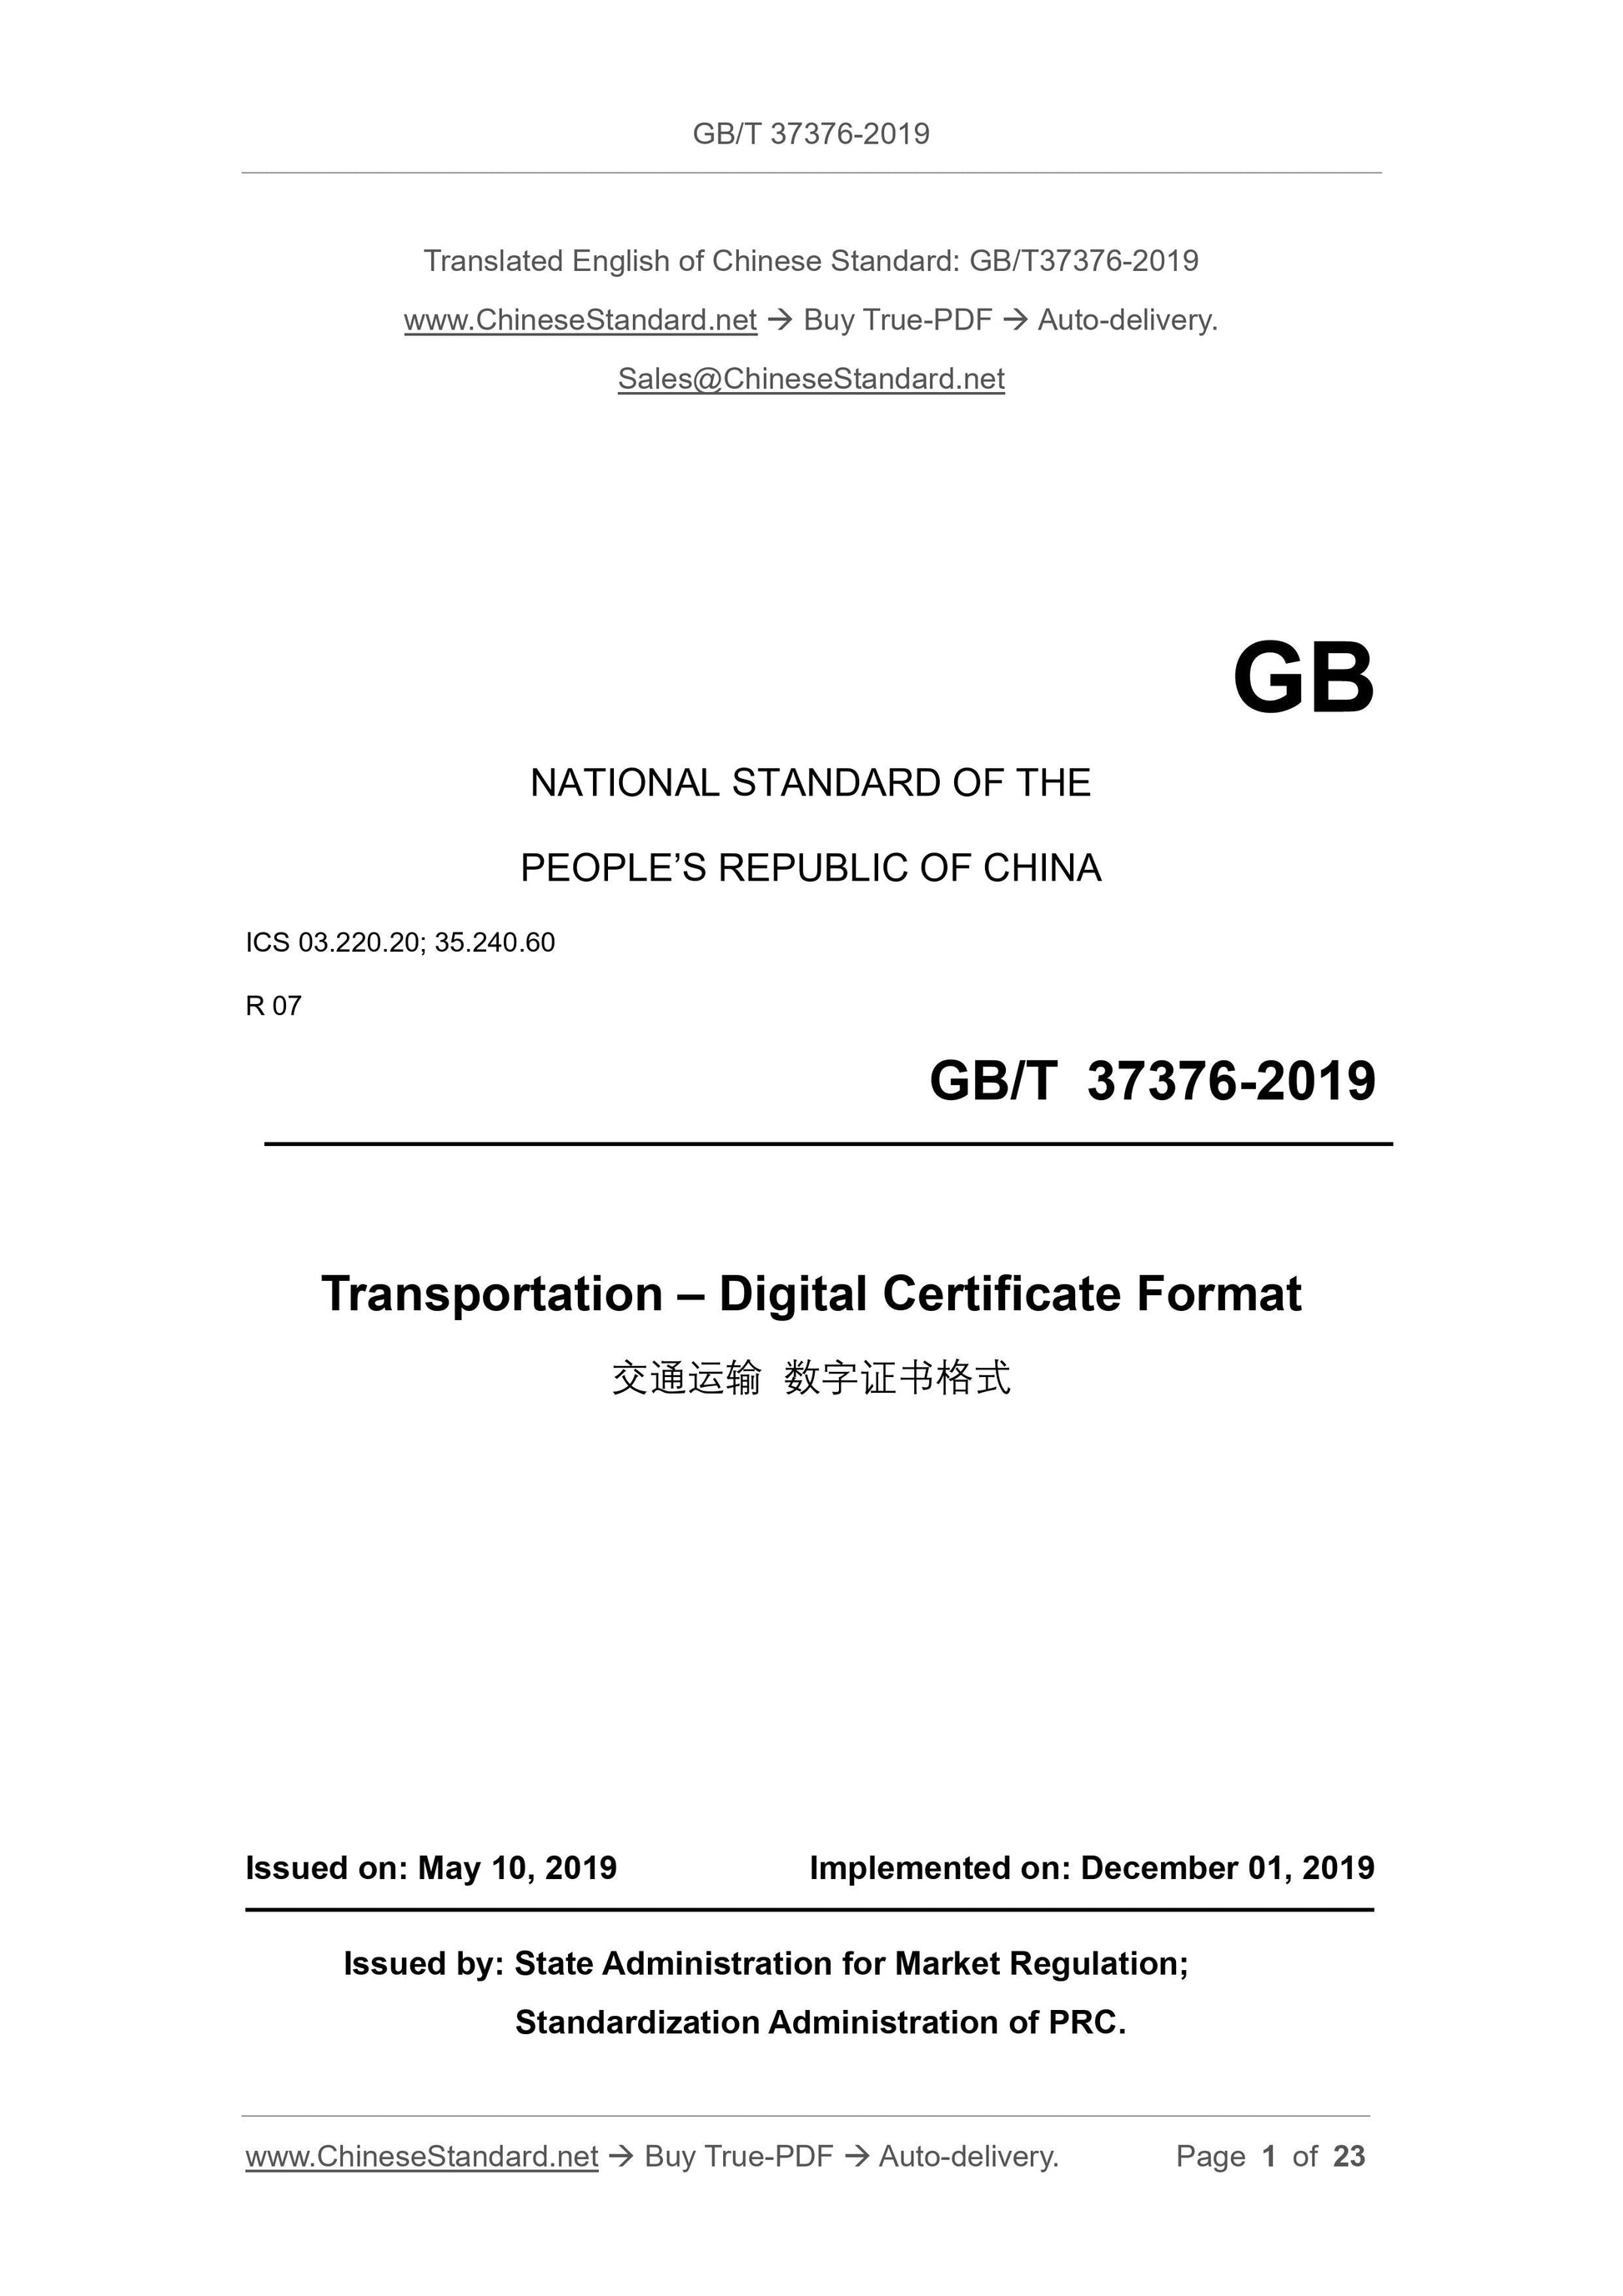 GB/T 37376-2019 Page 1